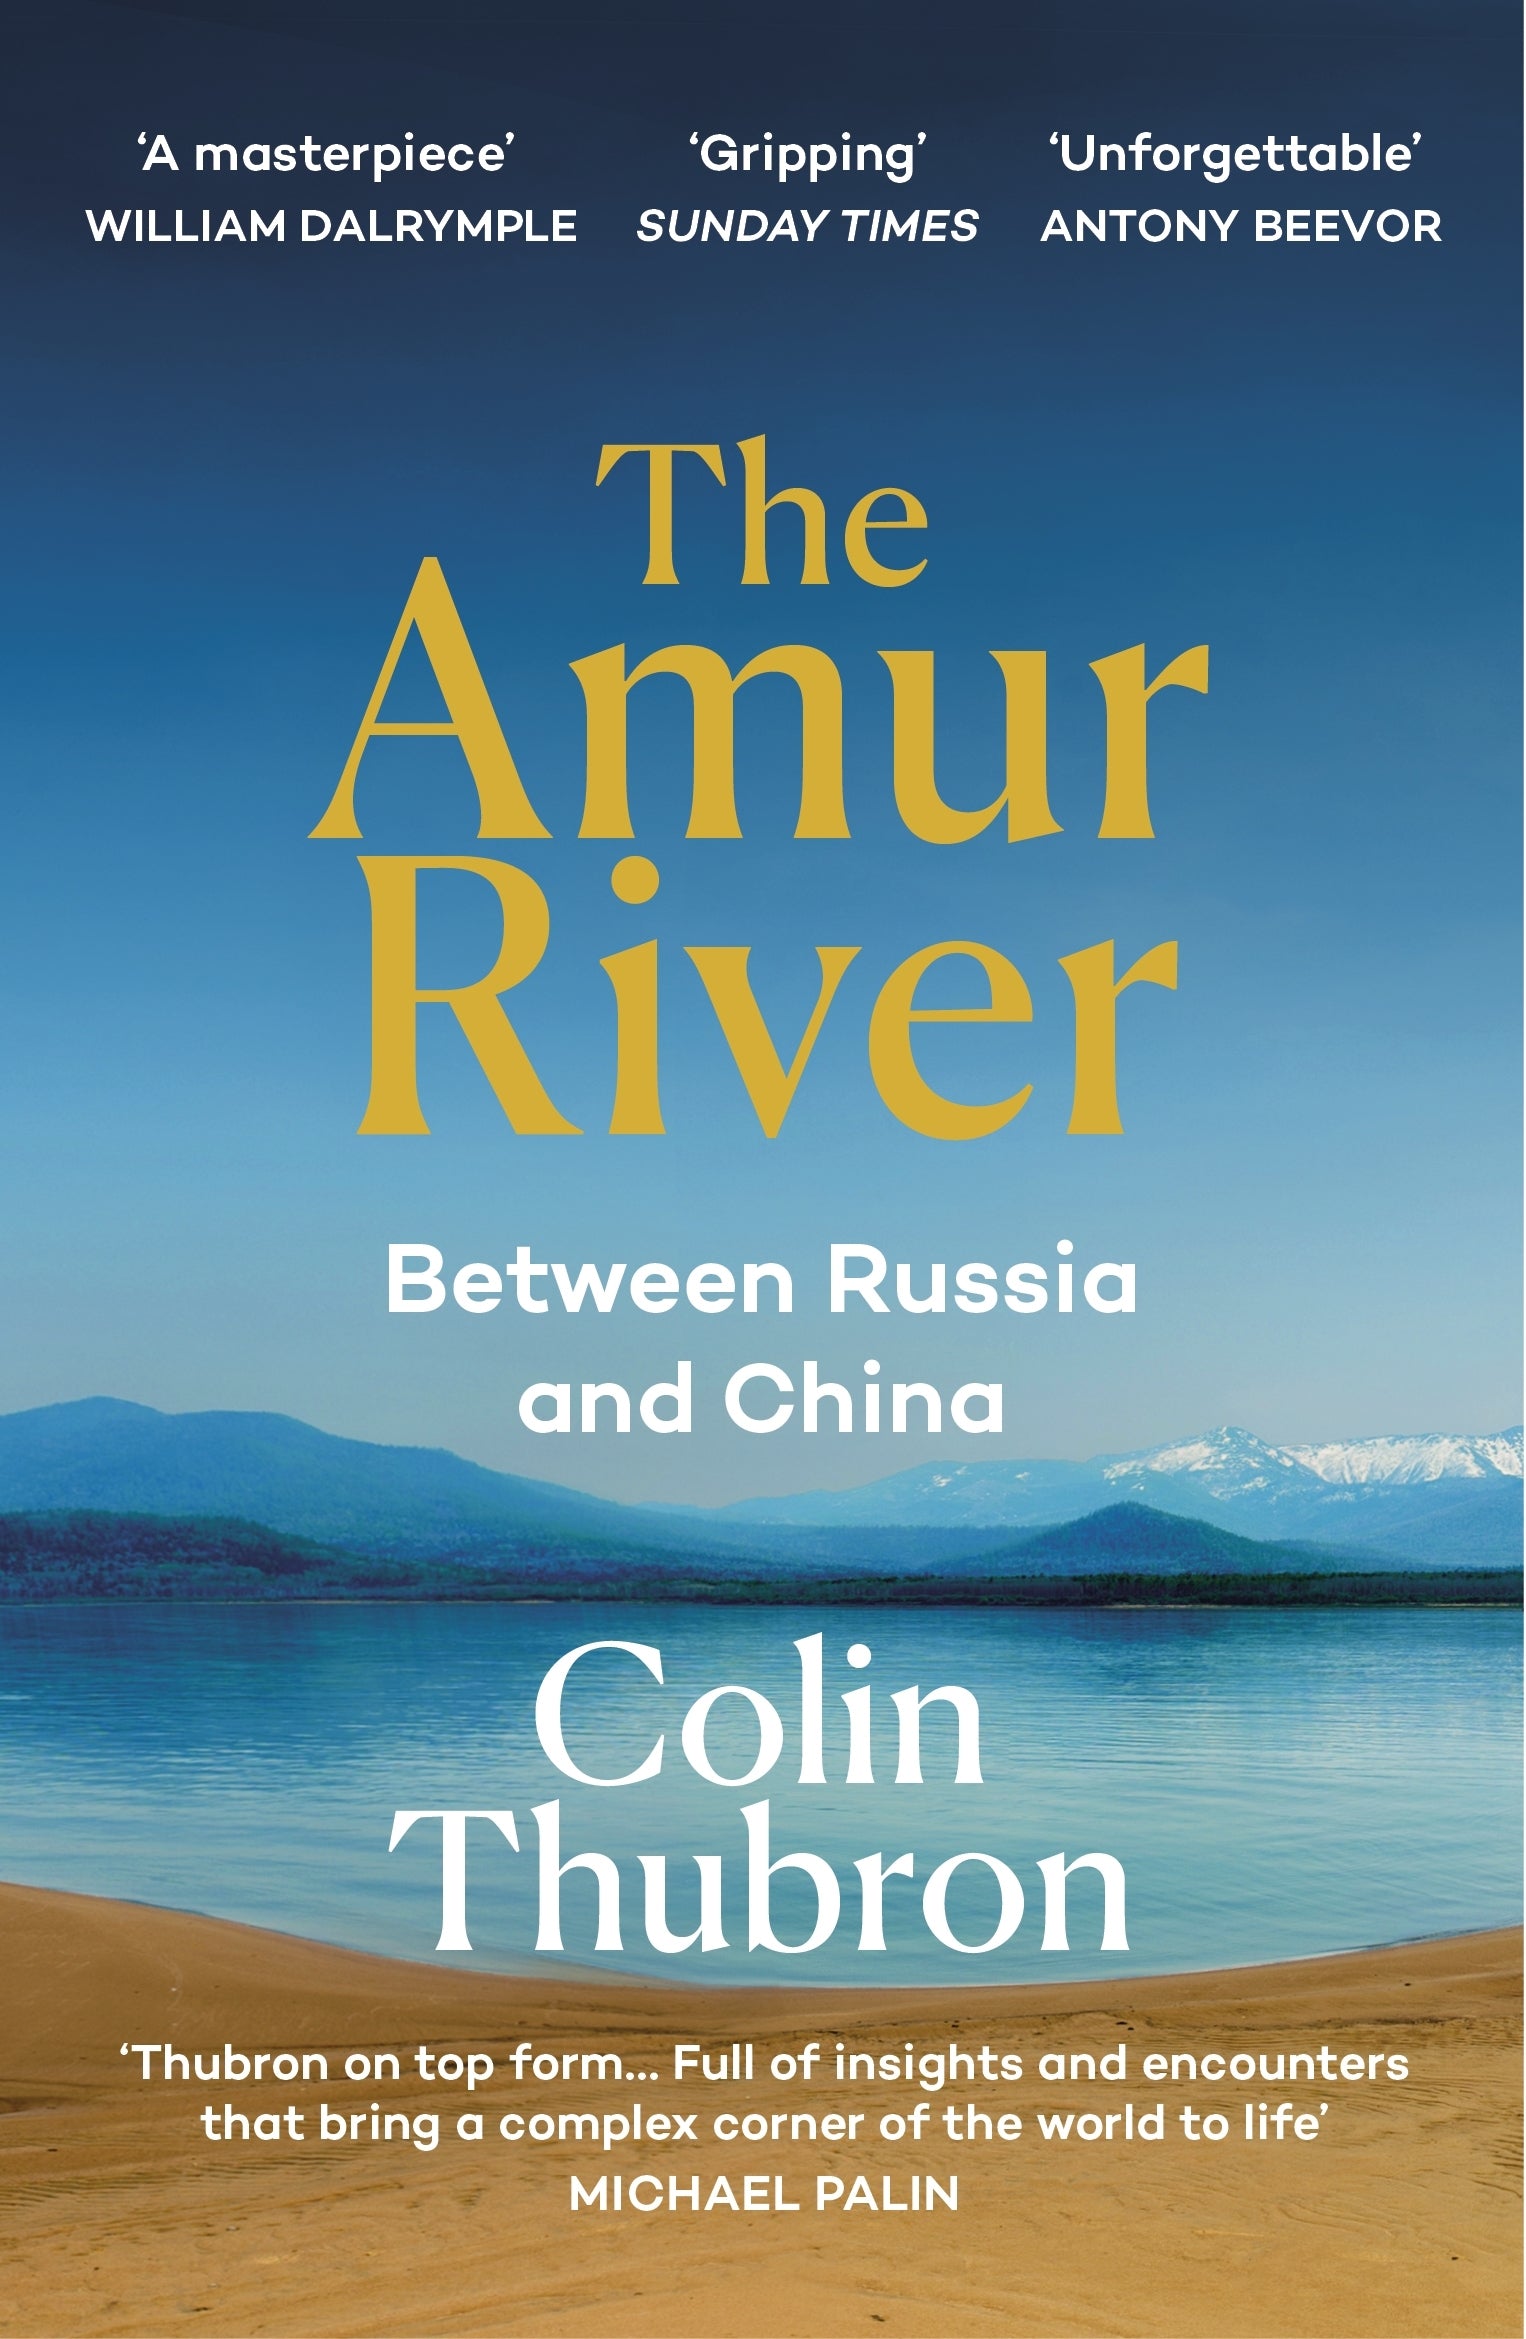 Russia　China　The　Between　Chart　Amur　–　Buy　Shop　and　The　River:　Map